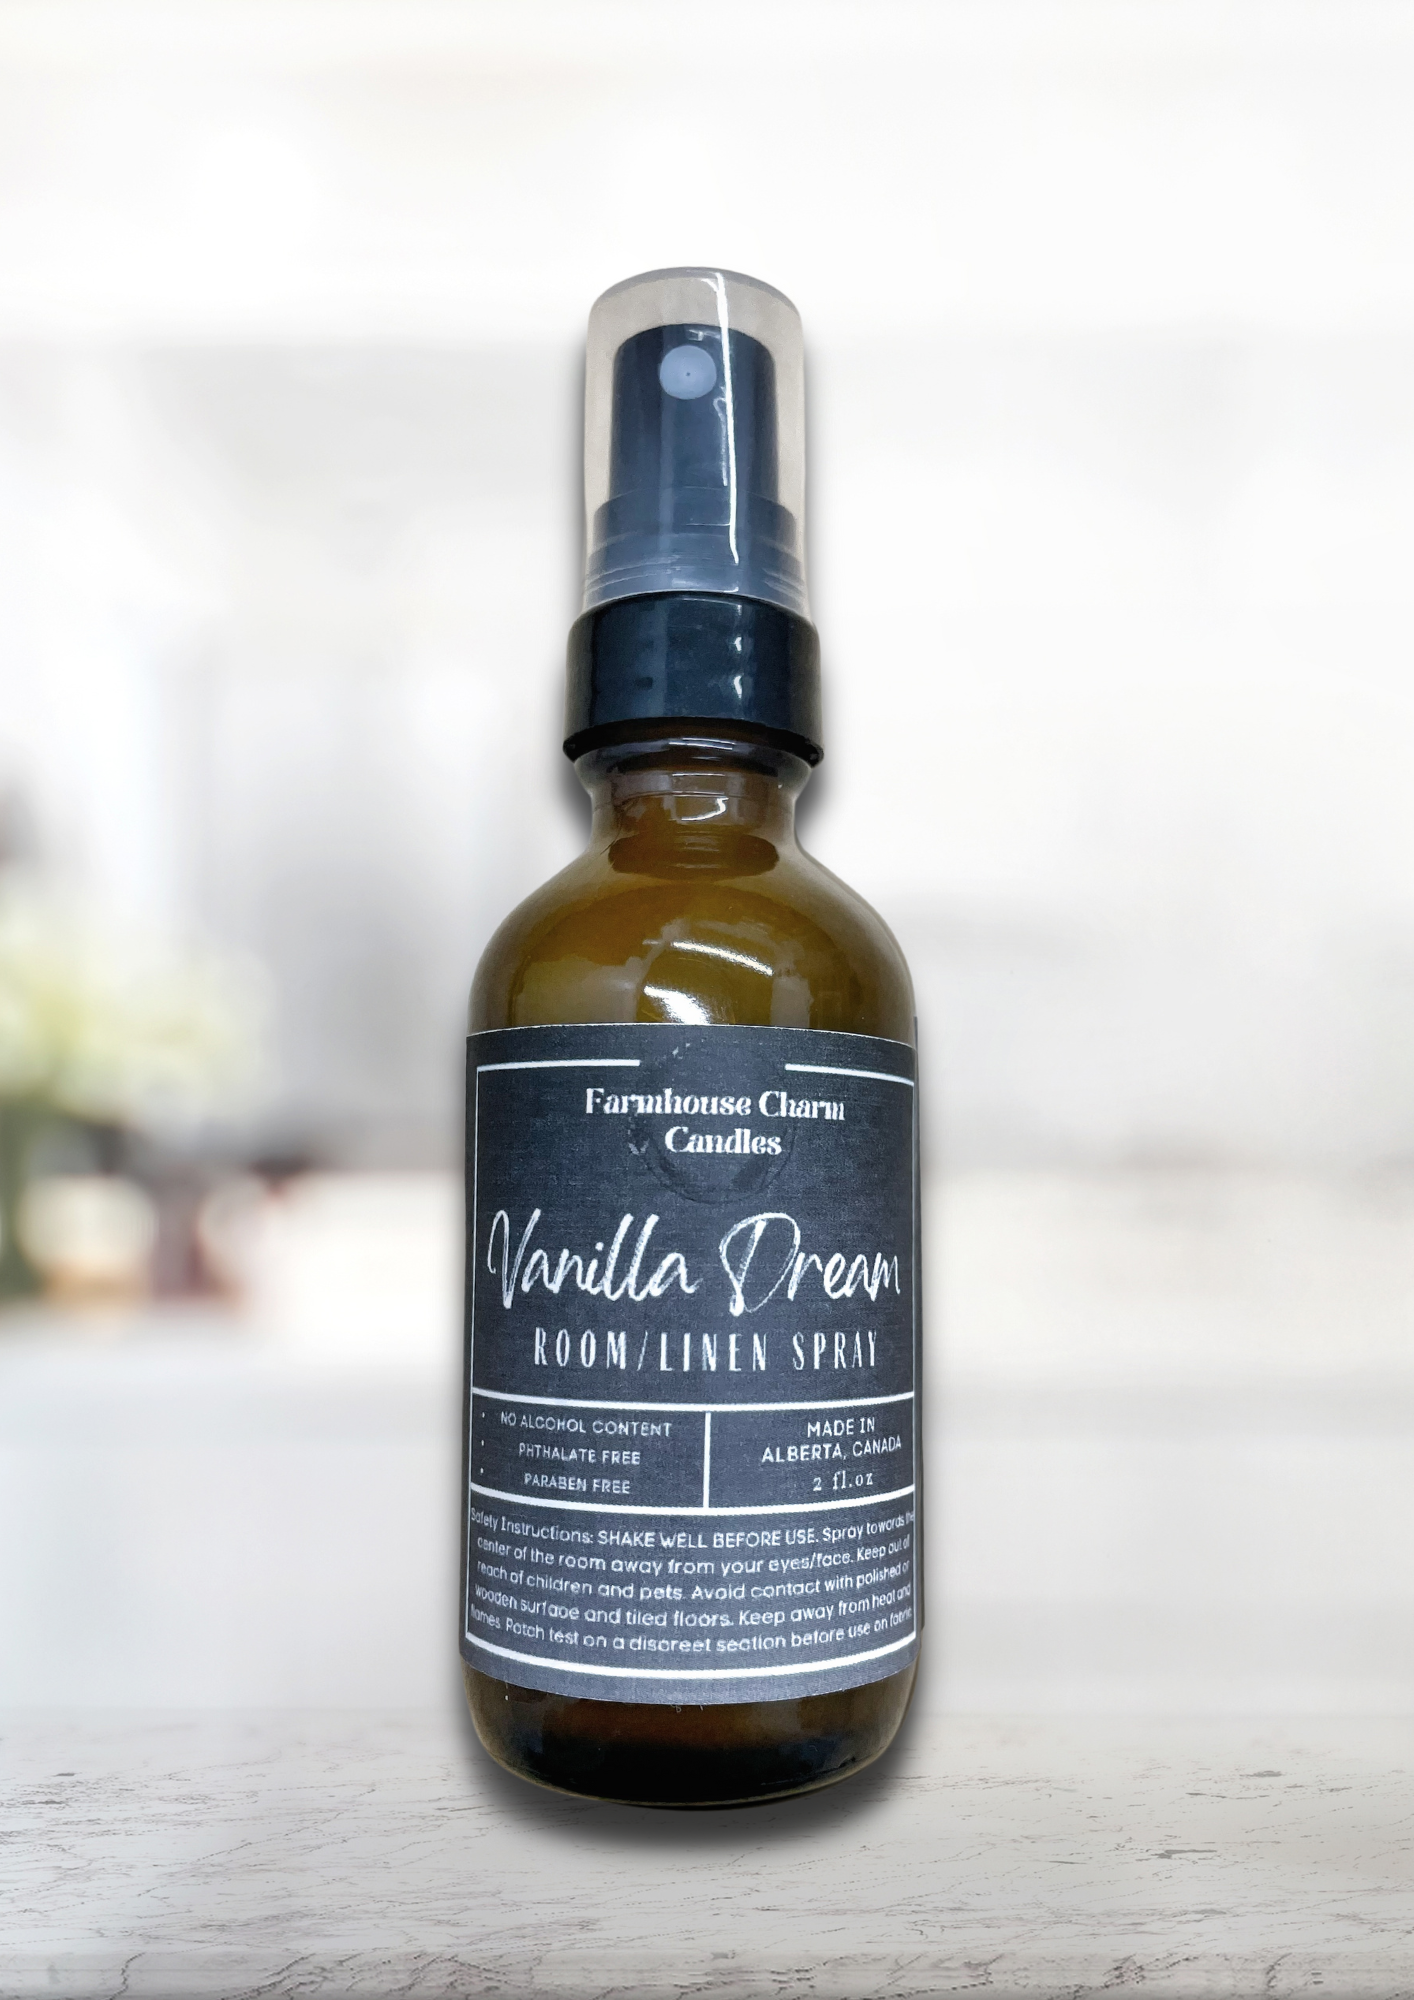 Vanilla Dream Room and Linen Spray- Farmhouse Charm  is a blend of rich and creamy nuances of vanilla bean with a hint of floral notes of geranium.   Vanilla Dream Room and Linen Spray- Farmhouse Charm  Net Weight: 2 oz No Alcohol Content Phthalate Free Paraben Free